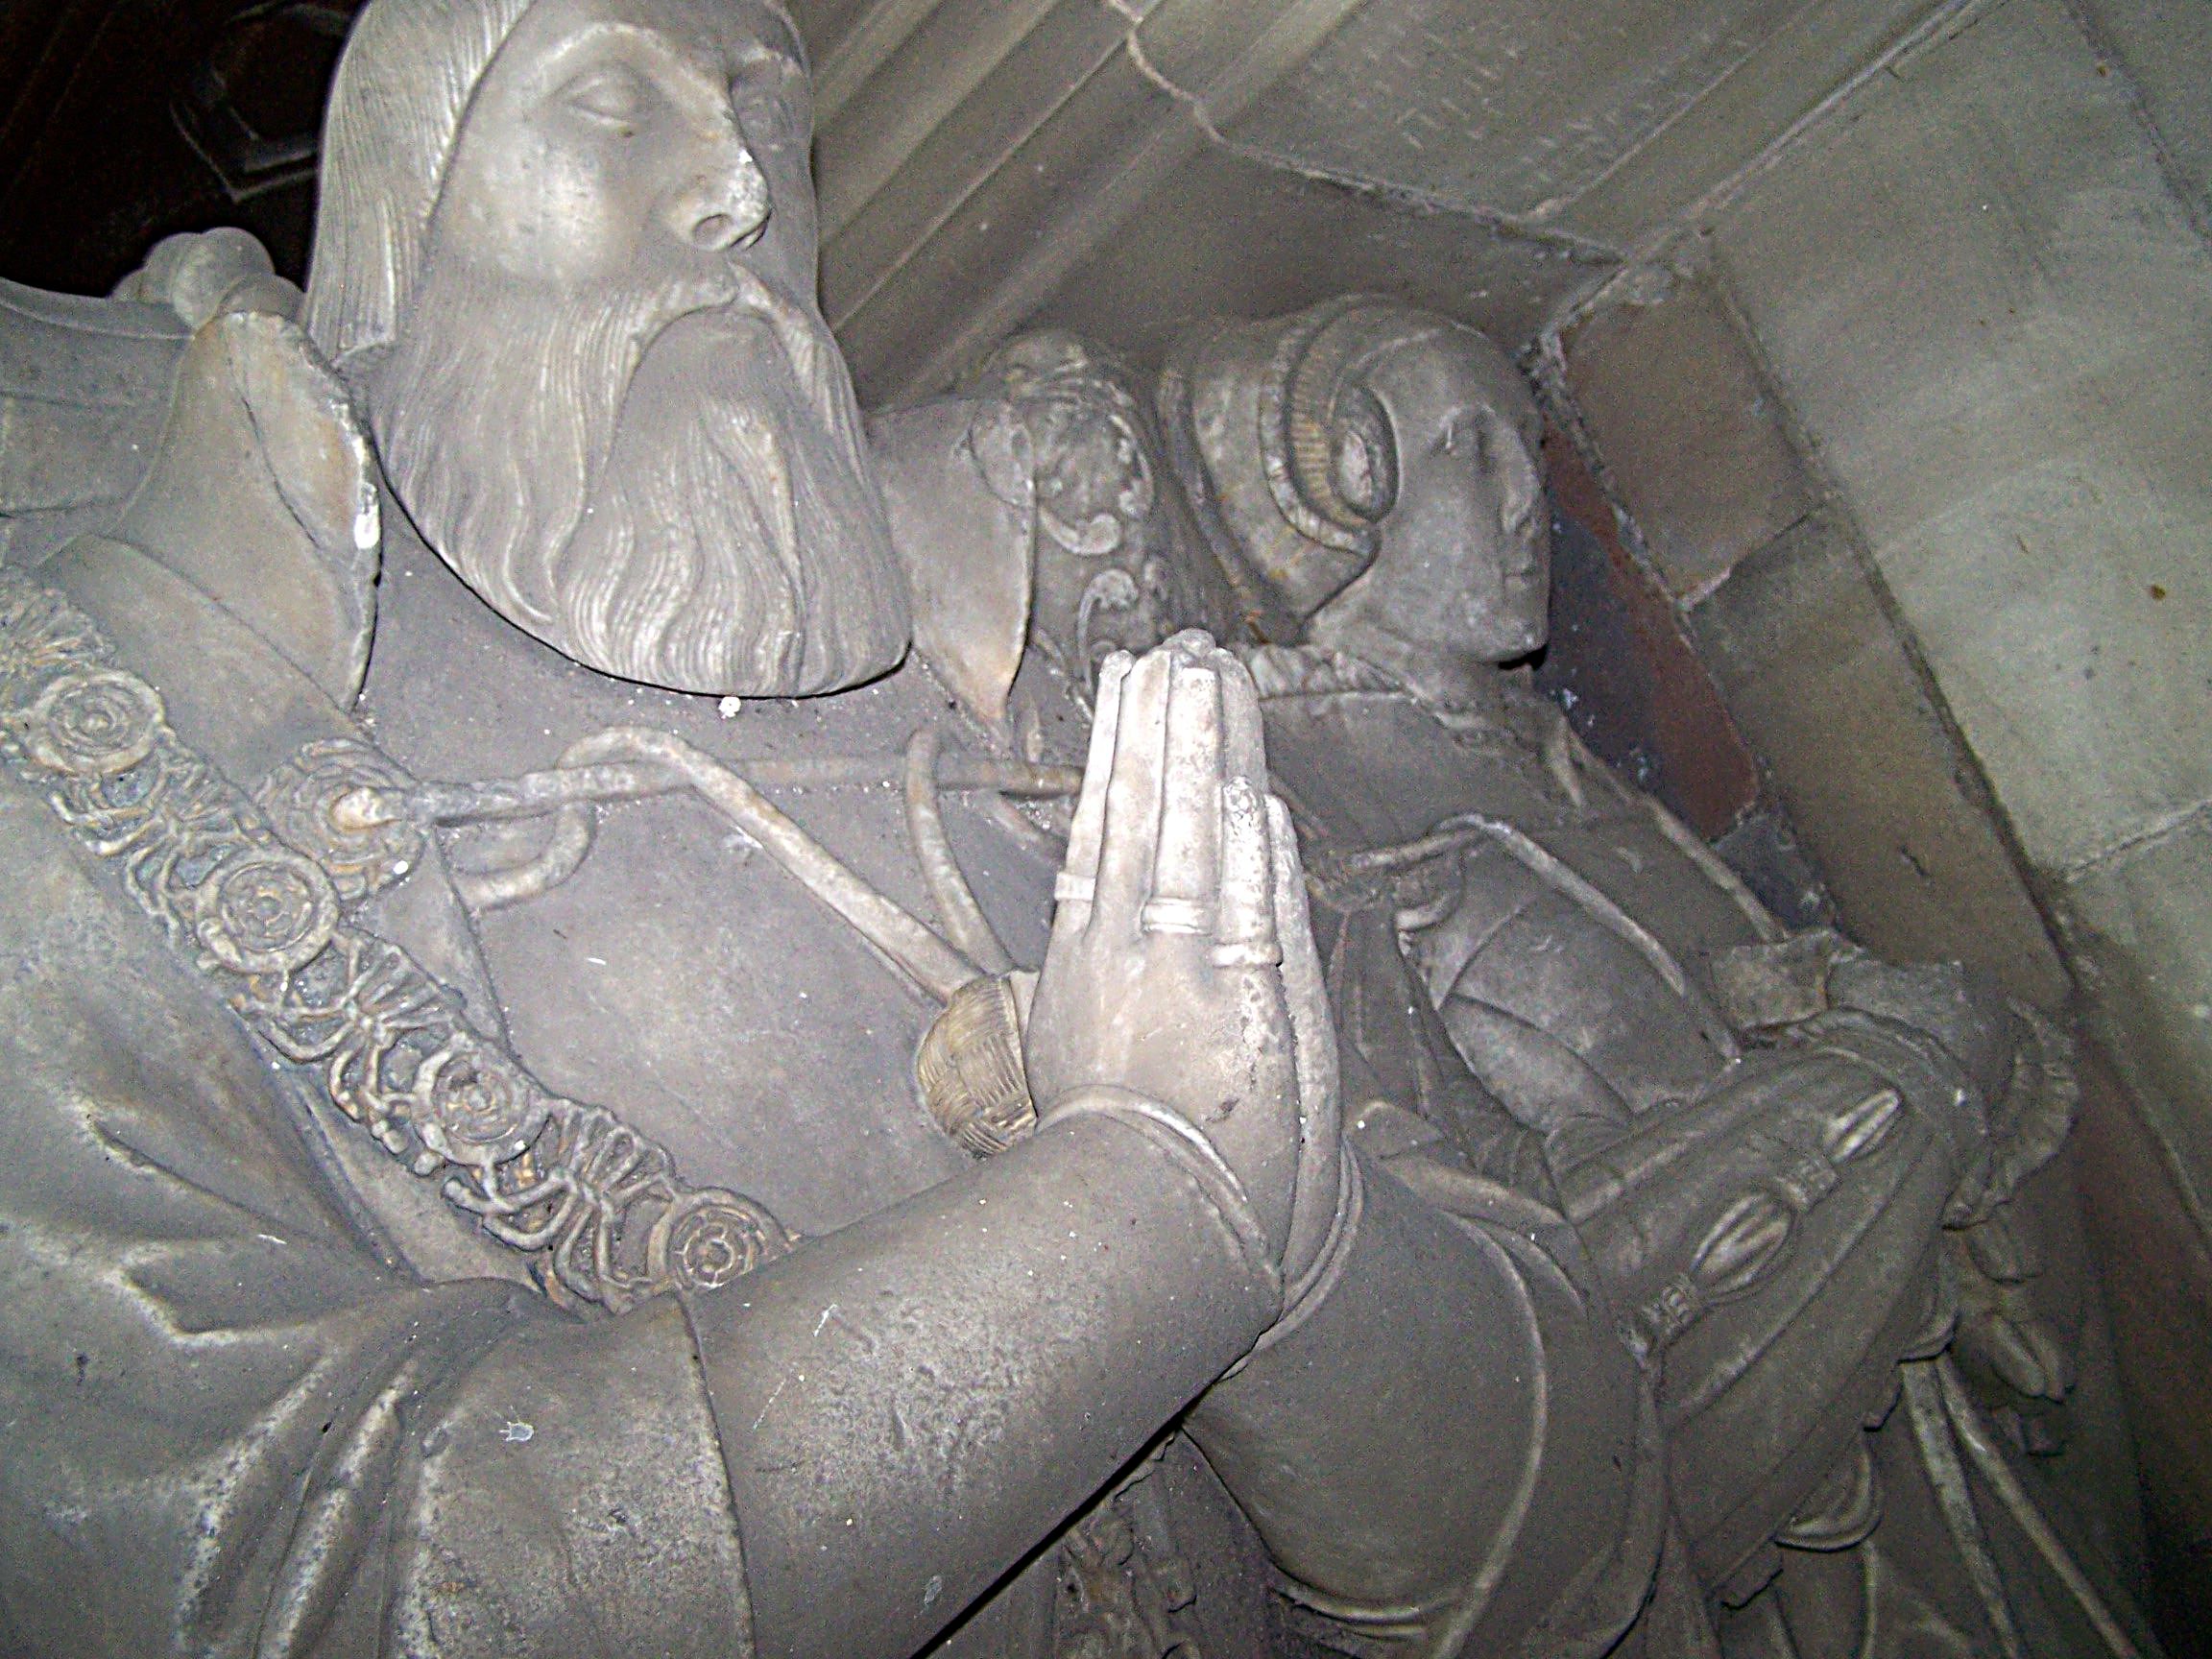 1558 (approx) - Monument of Walter Devereux and his second wife